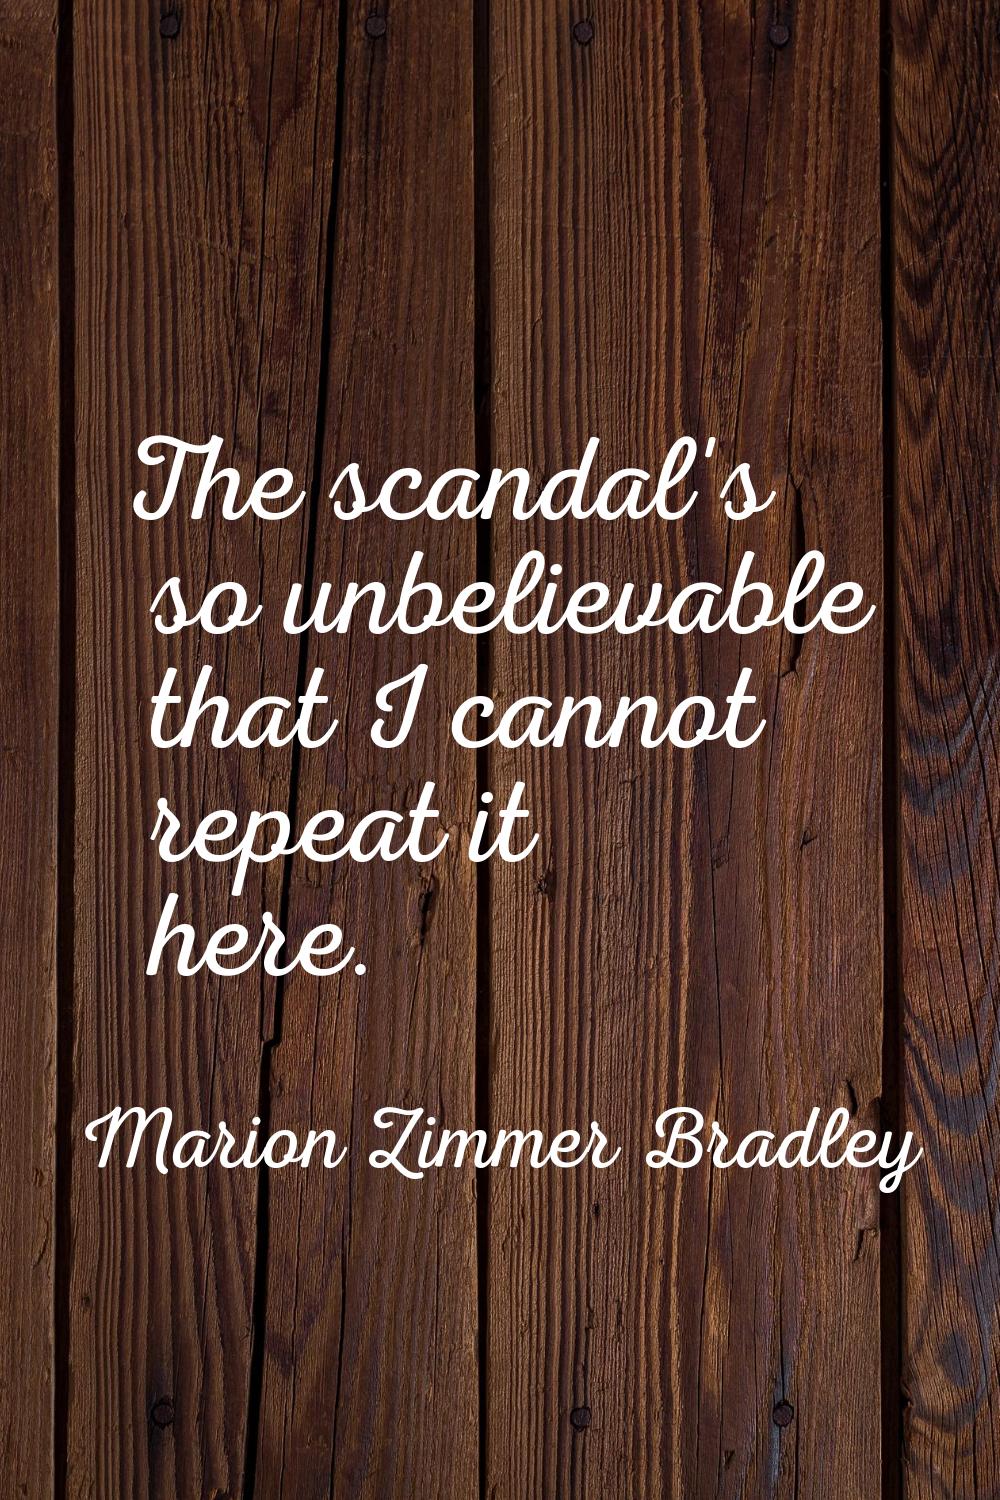 The scandal's so unbelievable that I cannot repeat it here.